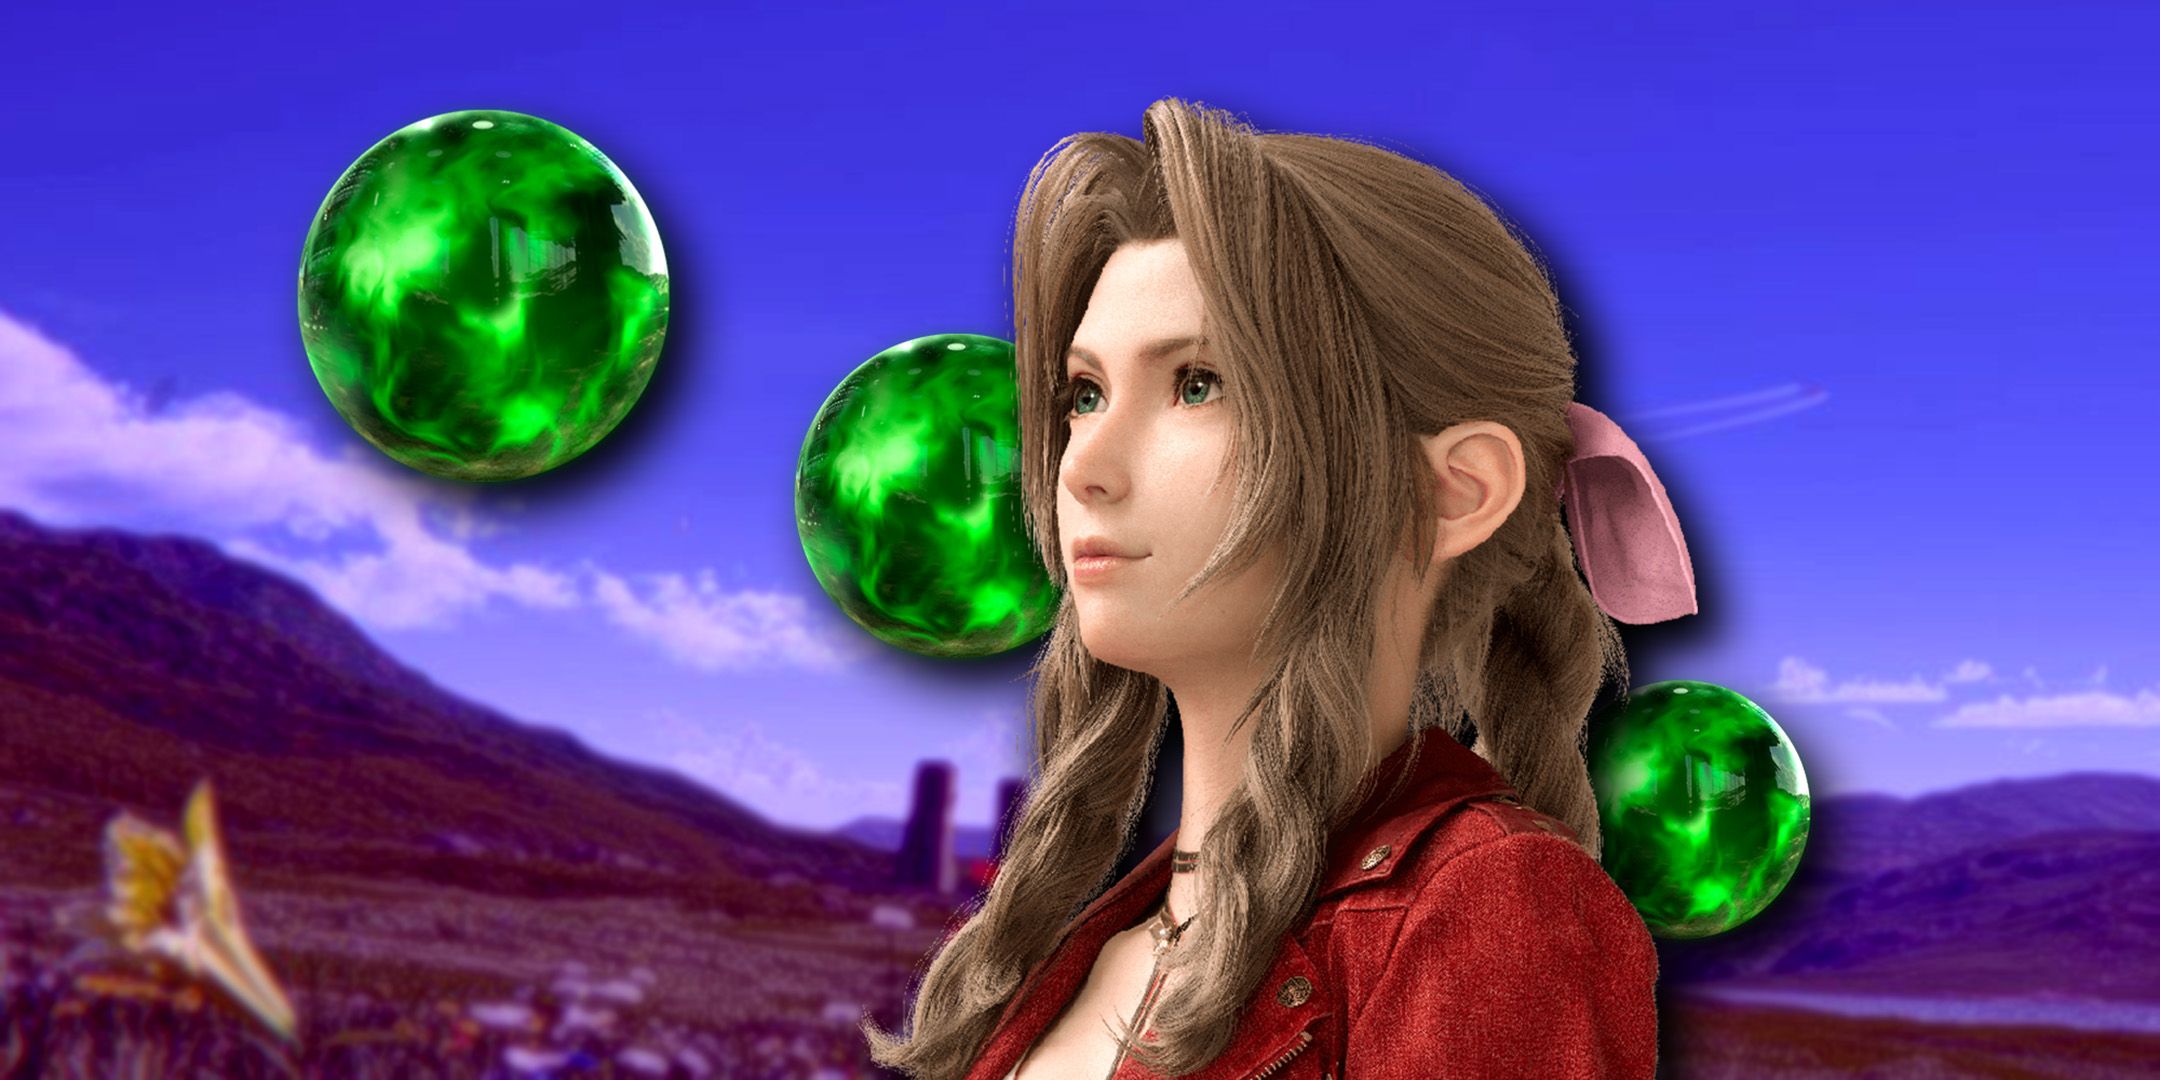 Aerith from Final Fantasy 7 Rebirth standing in a field surrounded by 3 orbs of green magic materia